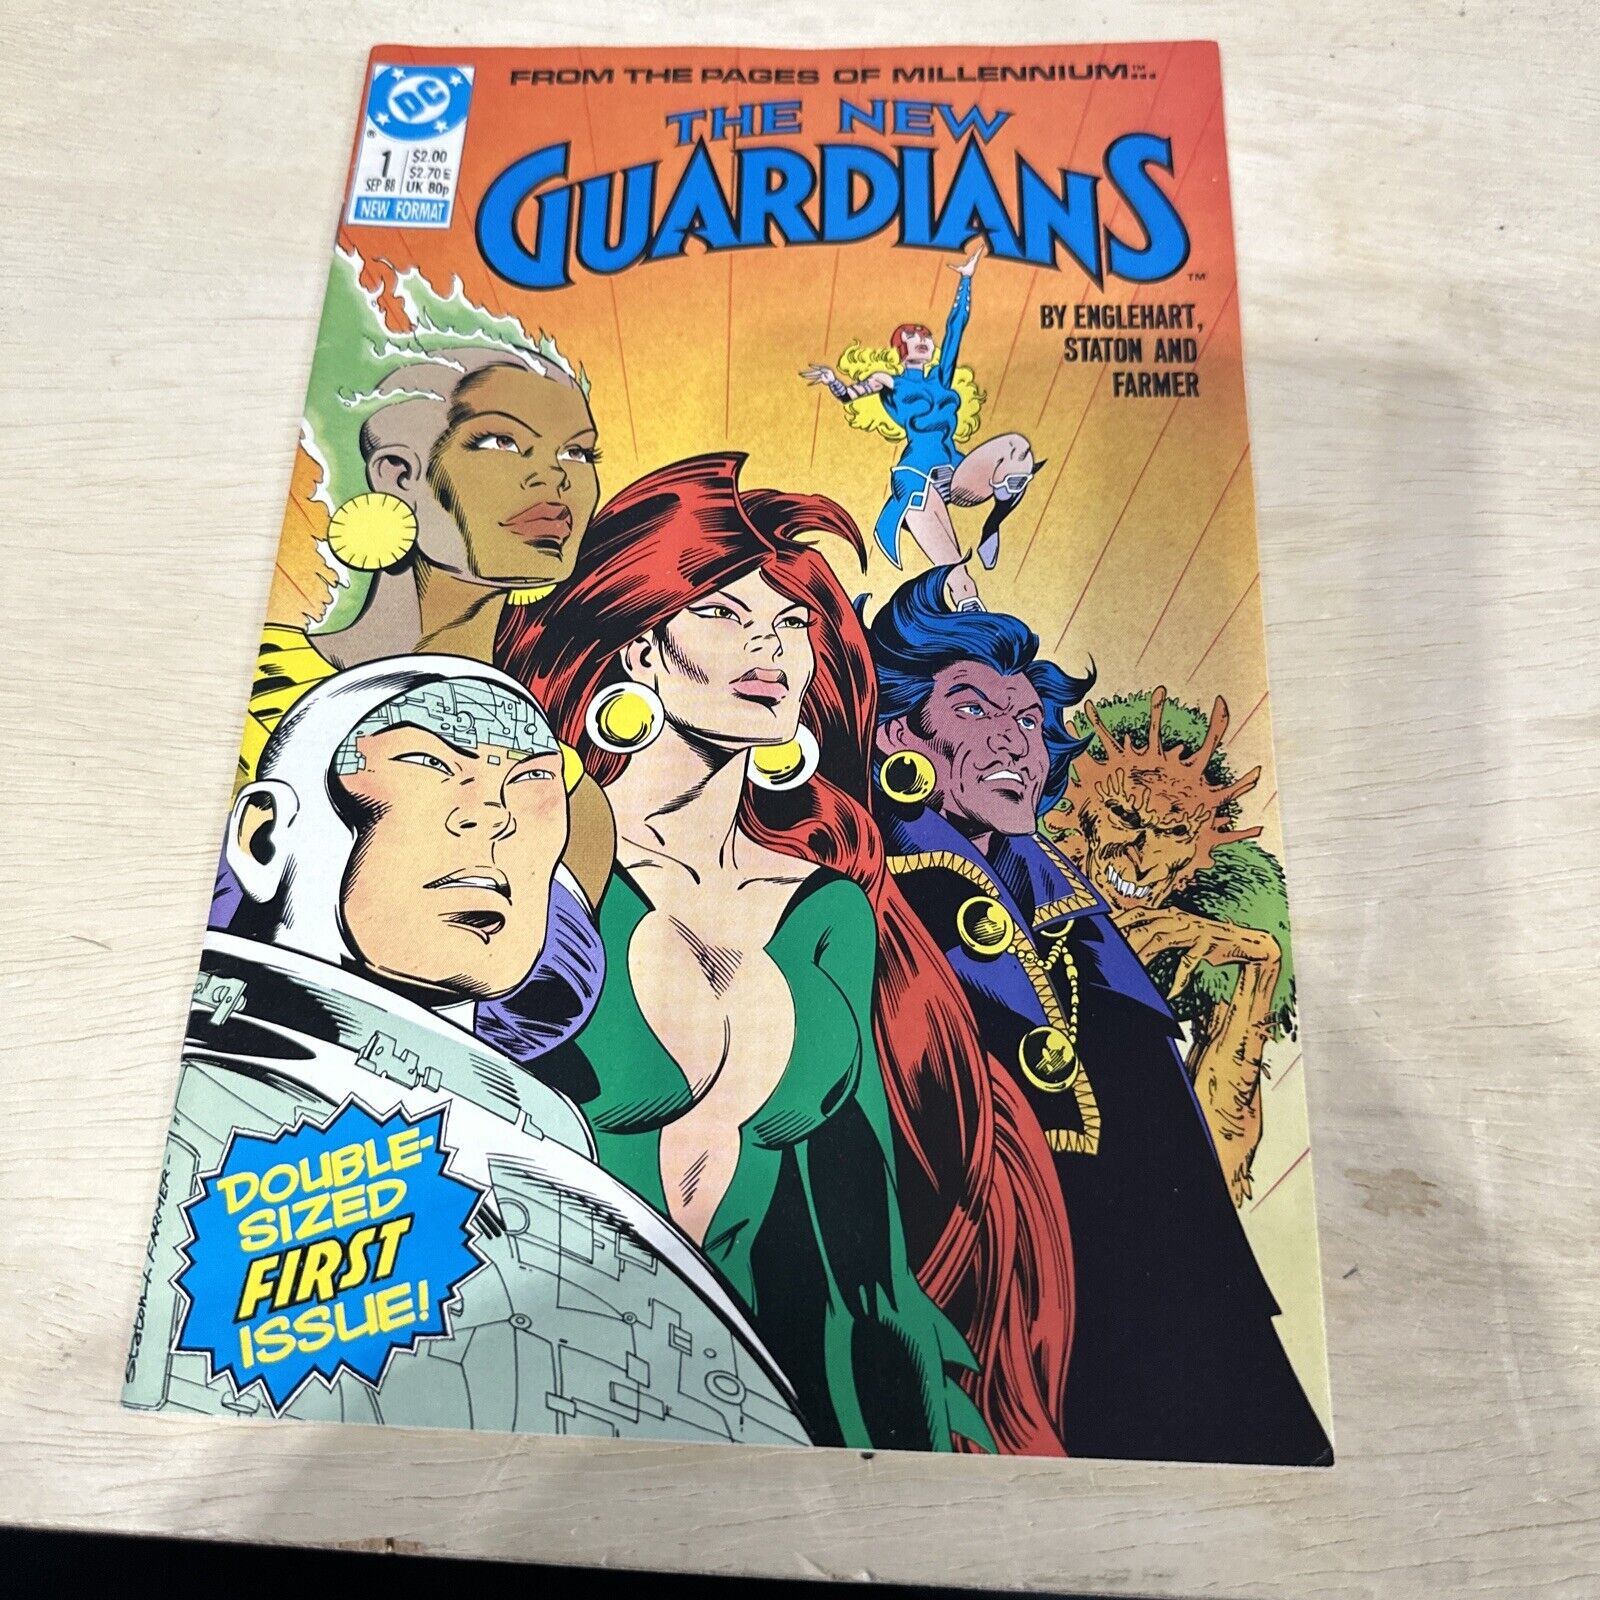 The New Guardians #1 (Sep 1988, DC)